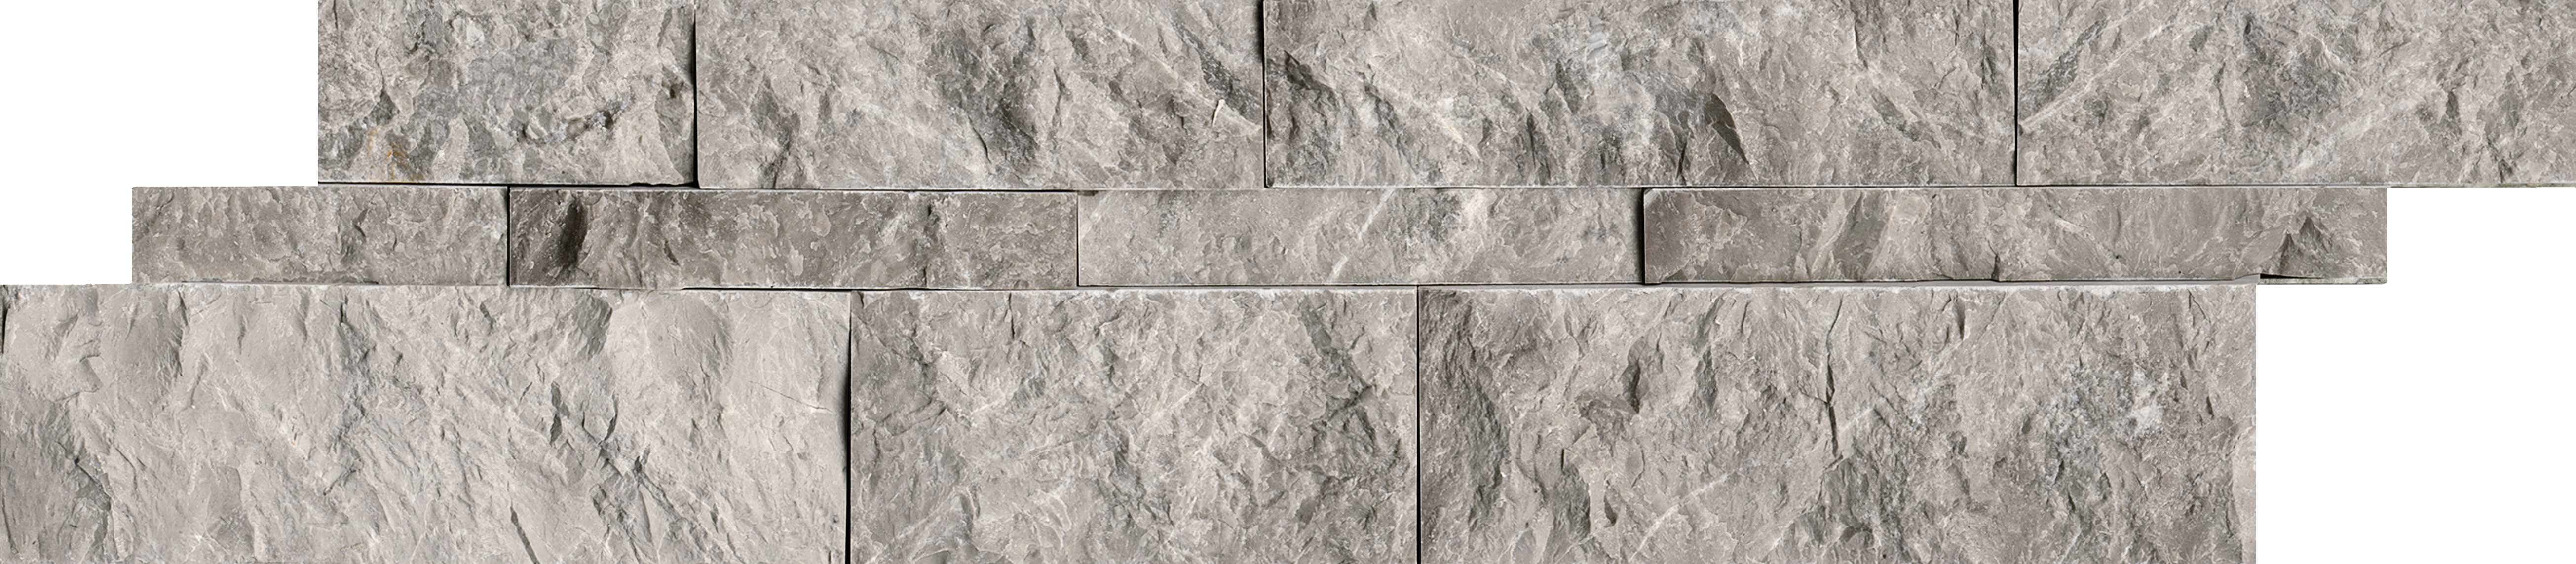 marble ritz gray pattern natural stone wall panel from cubics anatolia collection distributed by surface group international split face finish straight edge edge 6x24 interlocking shape